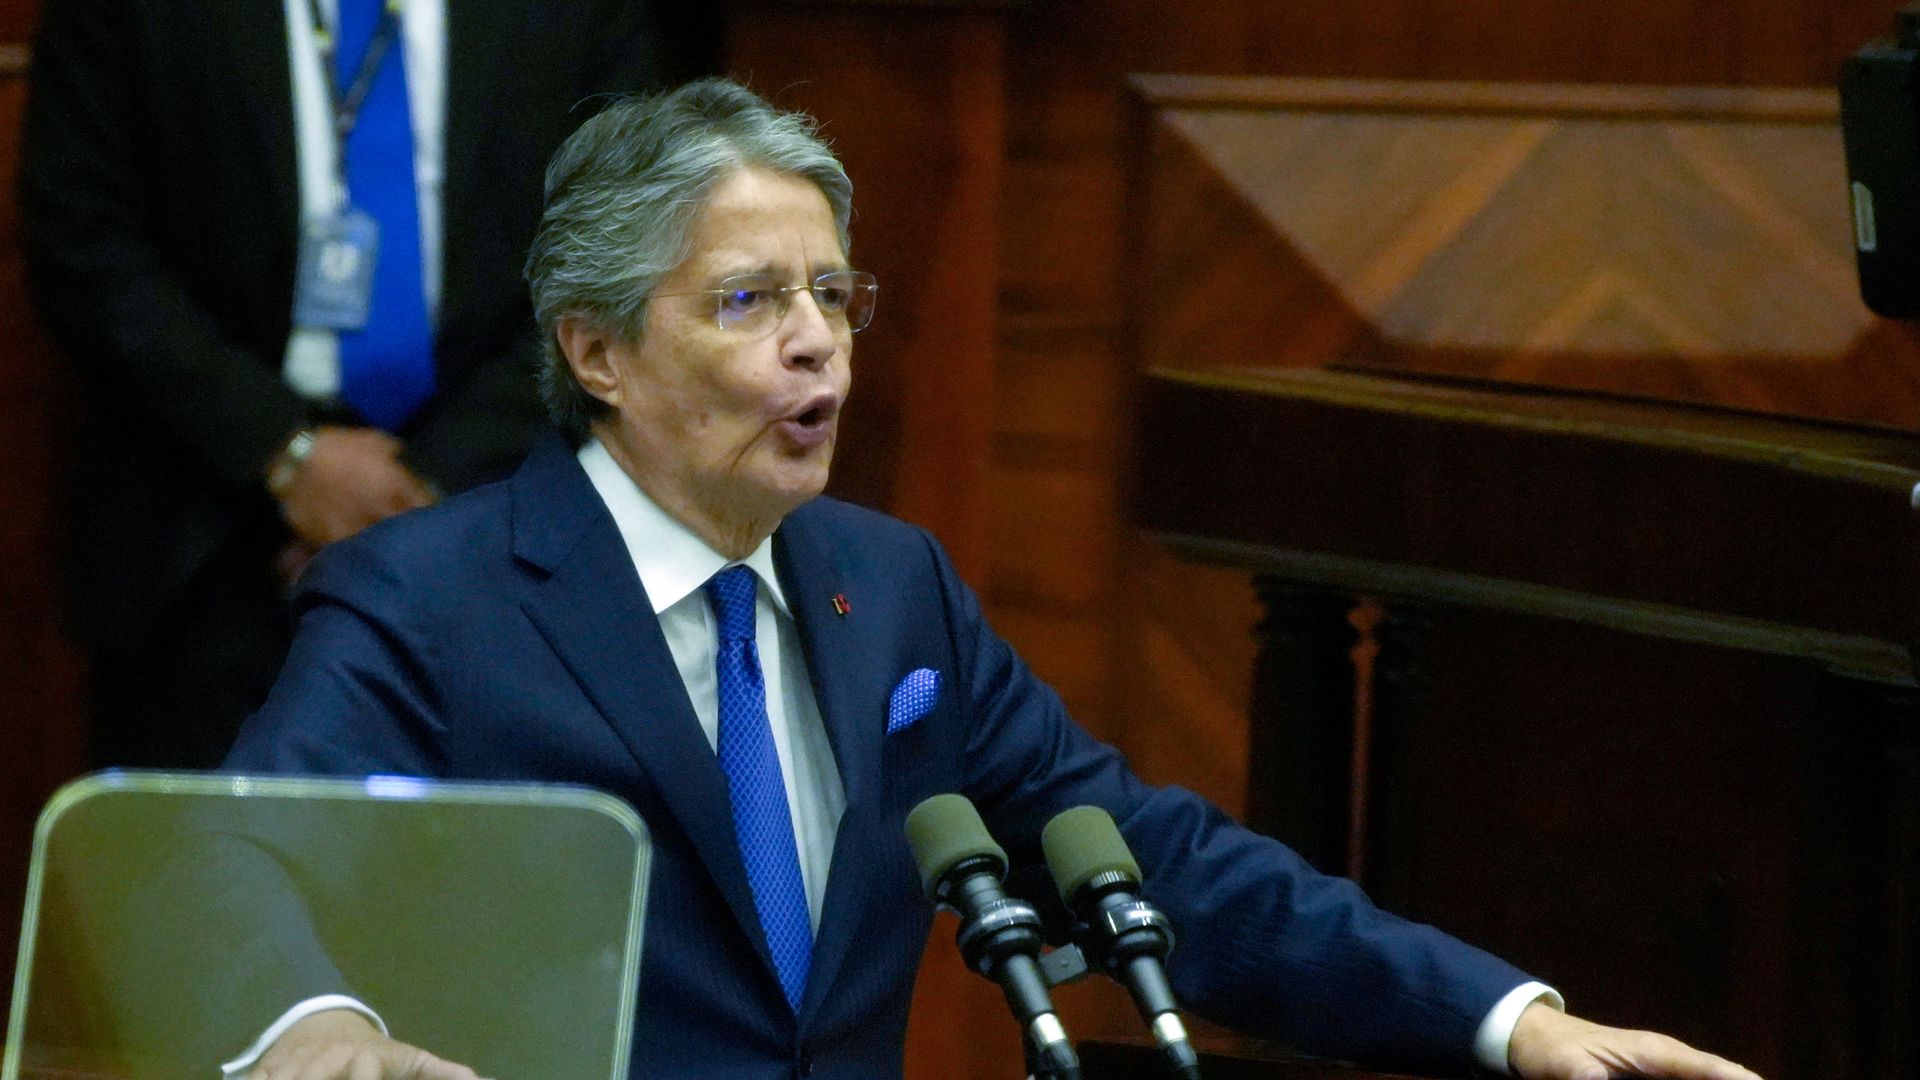 Ecuadorian president Guillermo Lasso speaks in front of two microphones during an impeachment hearing against him